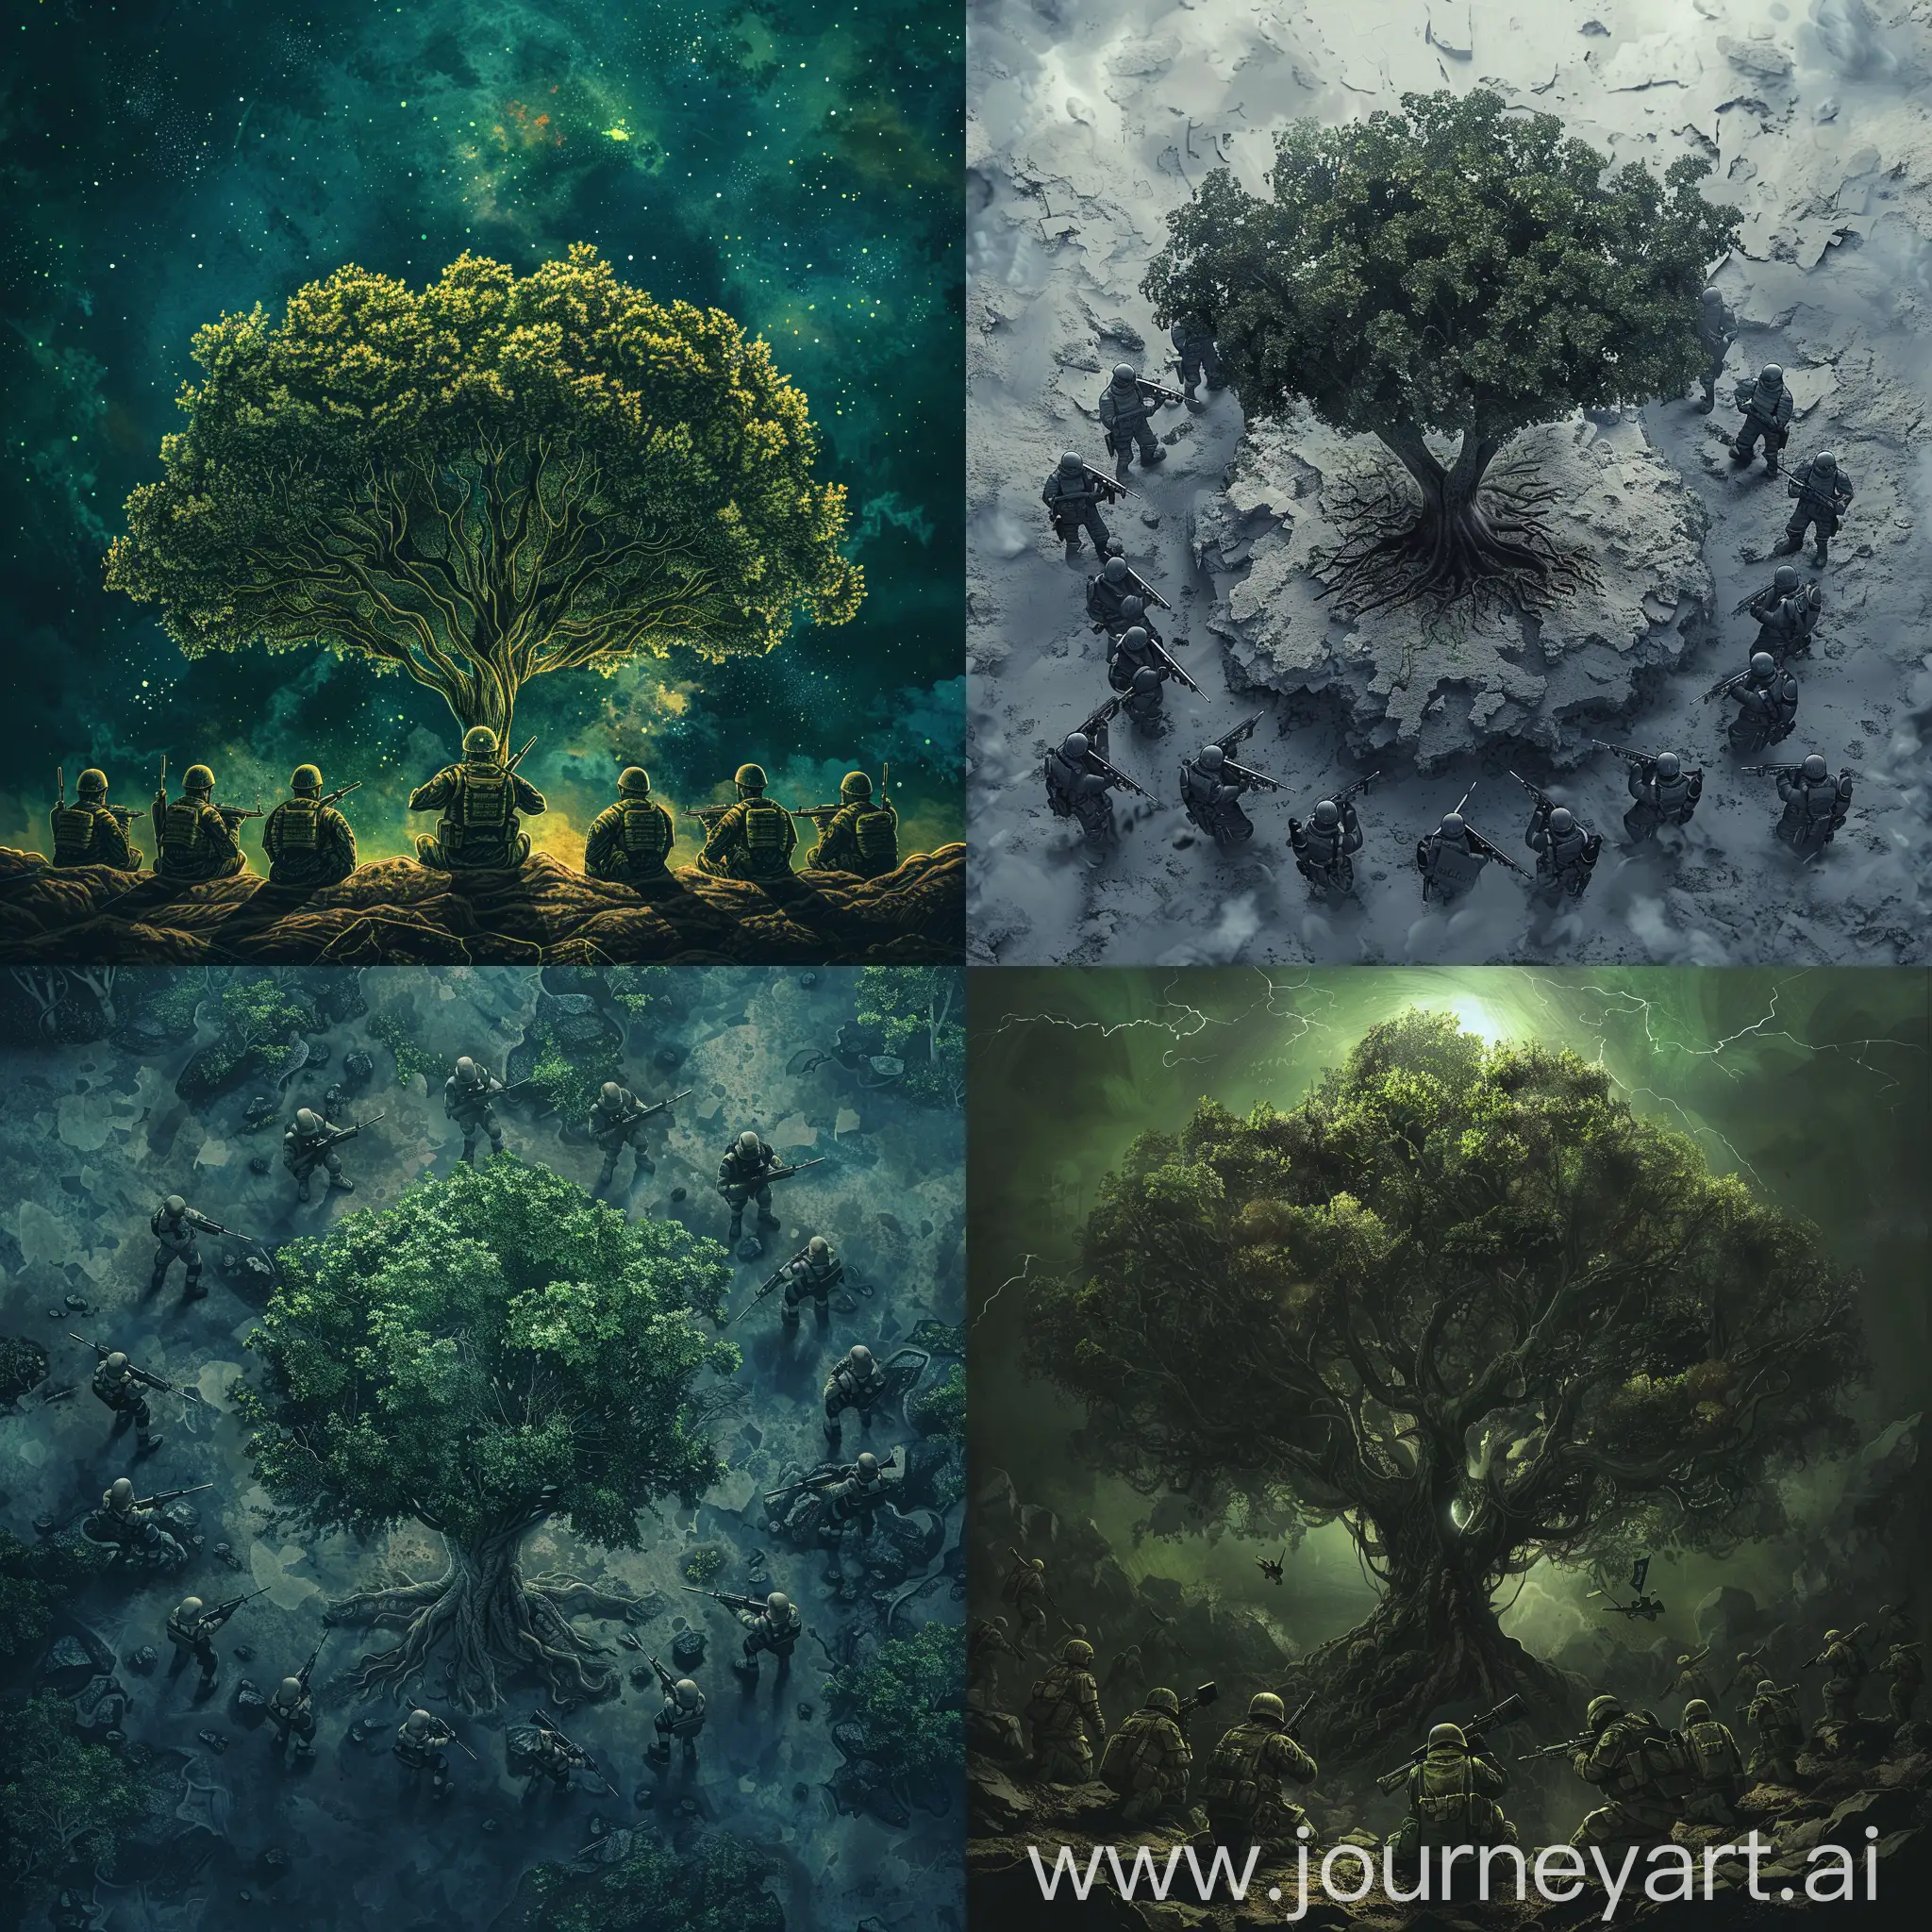 Create an image depicting a squad of soldiers or guardians surrounding and protecting the Last tree on Earth